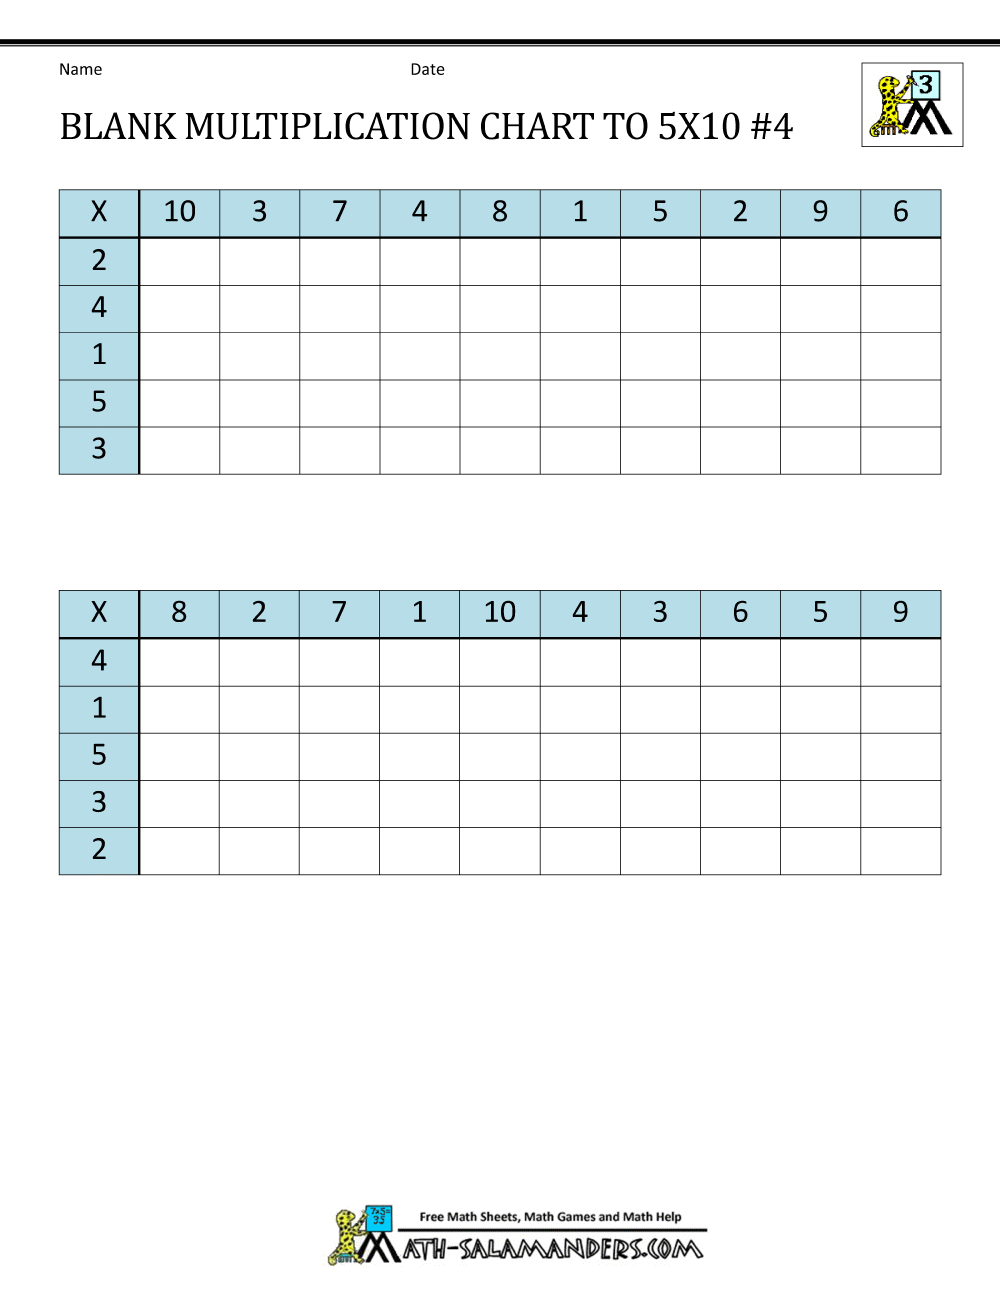 Blank Multiplication Chart up to 10x10